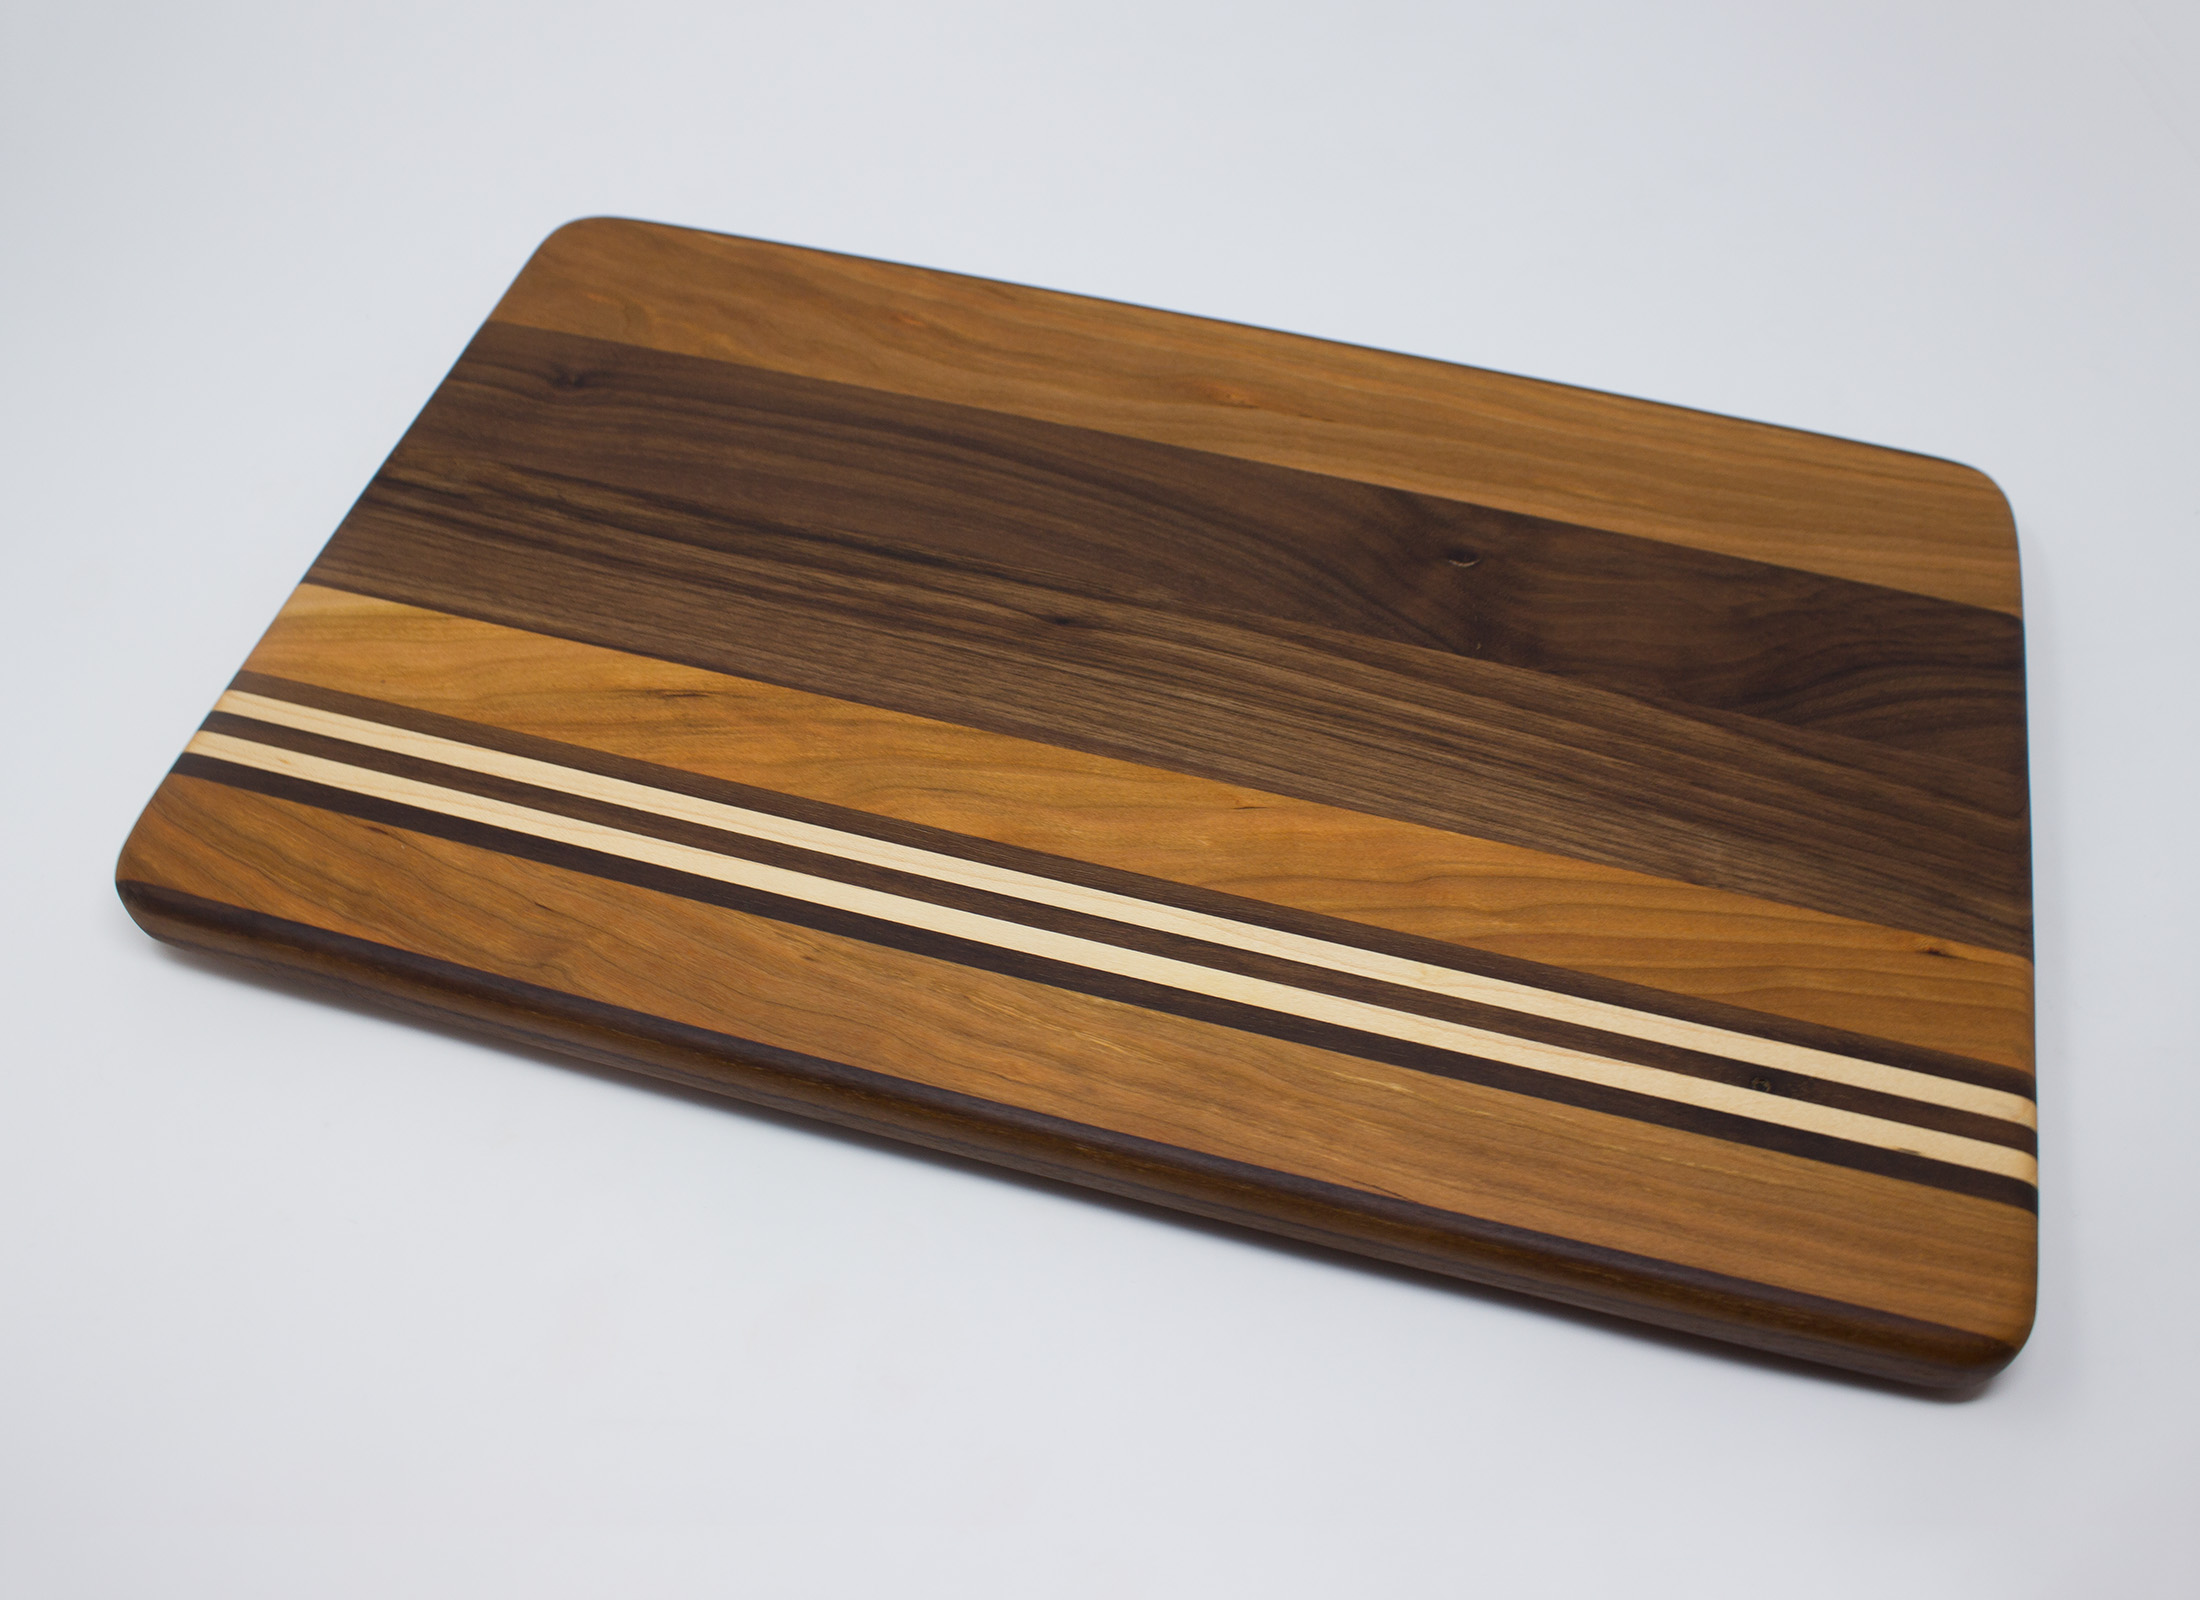 https://www.rockfordwoodcrafts.com/wp-content/uploads/Cherry-Walnut-and-Maple-with-Offset-Stripes-Cutting-Board-Top-Angled.jpg